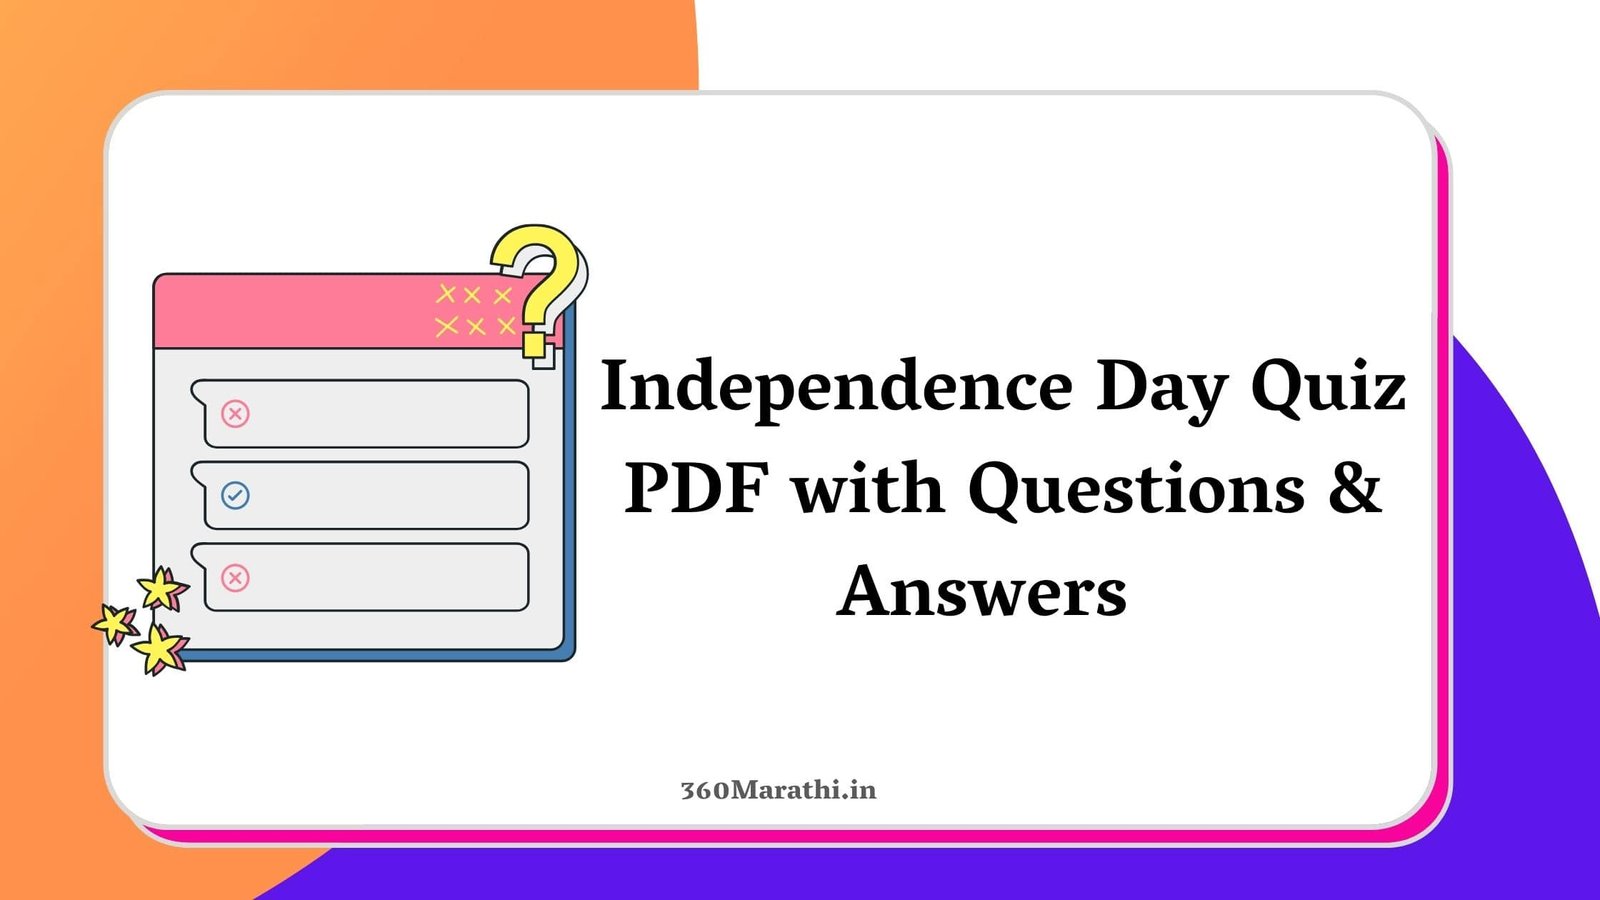 Independence Day Quiz PDF with Questions & Answers